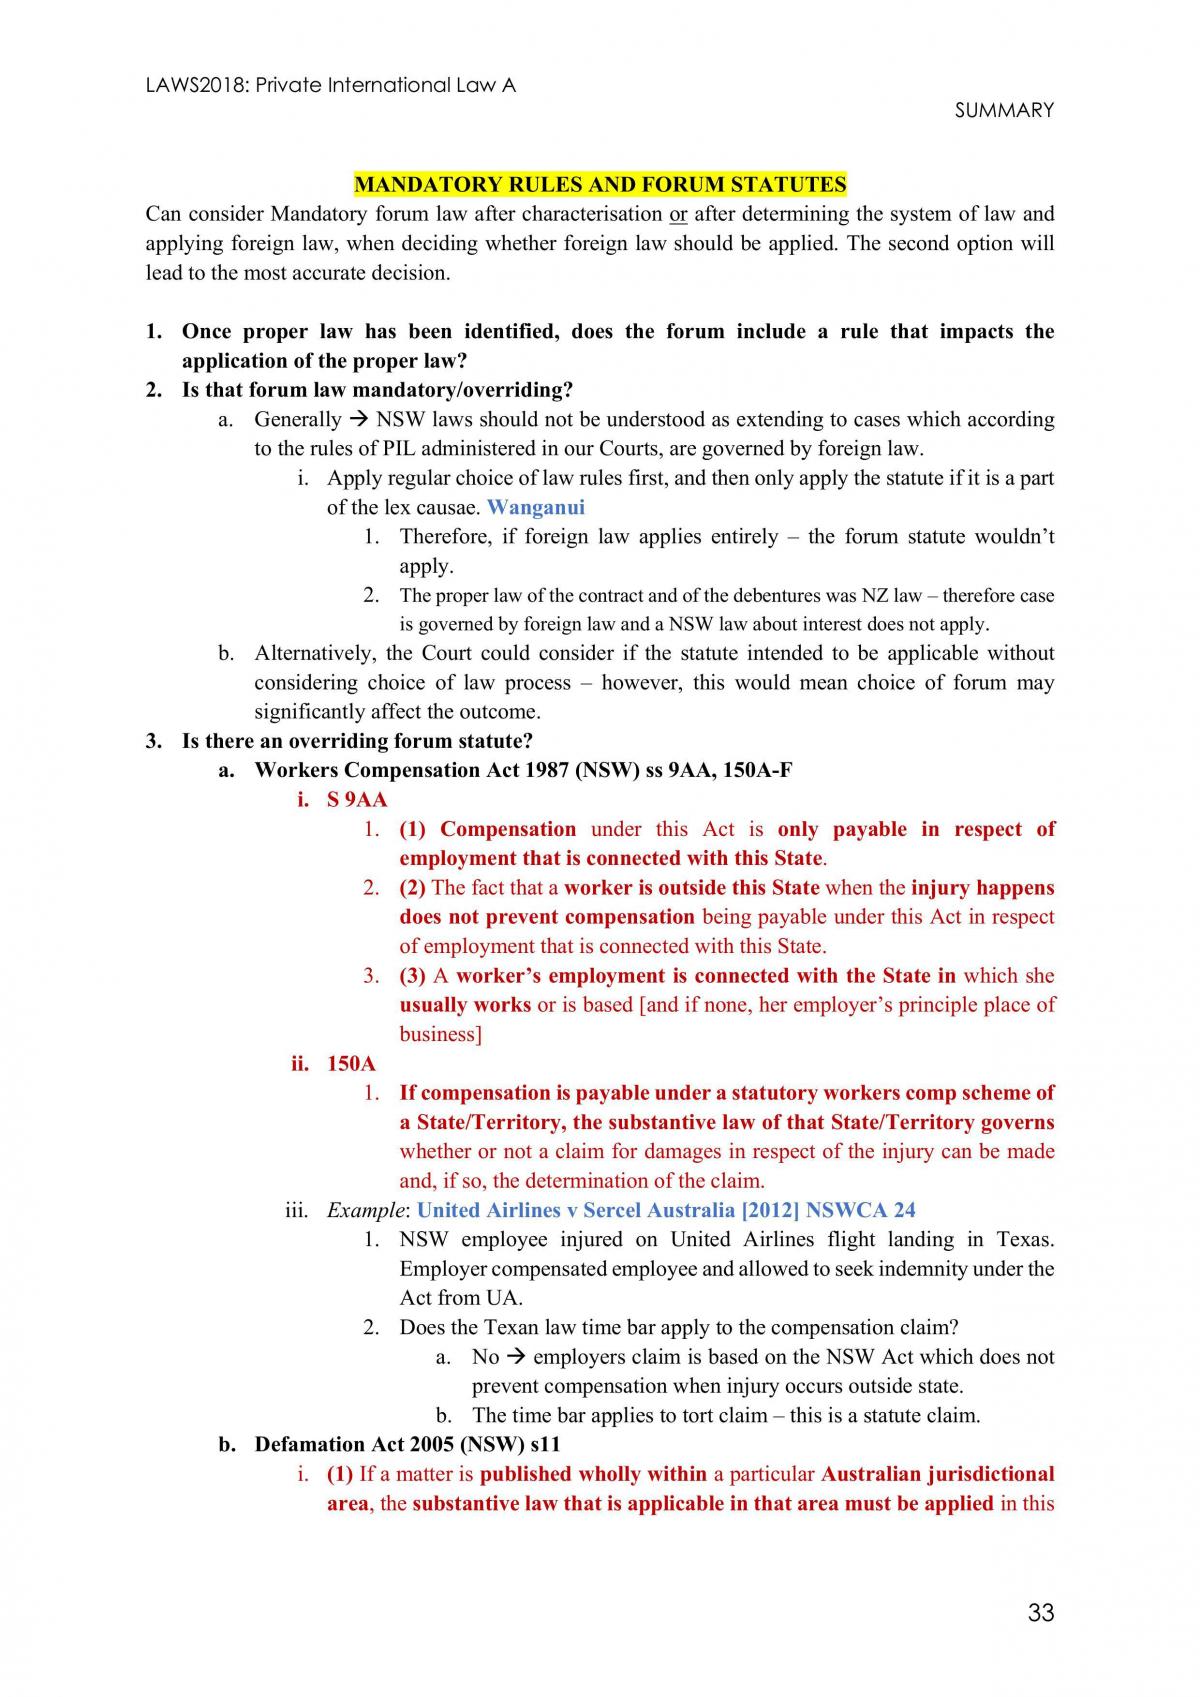 LAWS2018 PIL A Final Exam Summary - Page 33